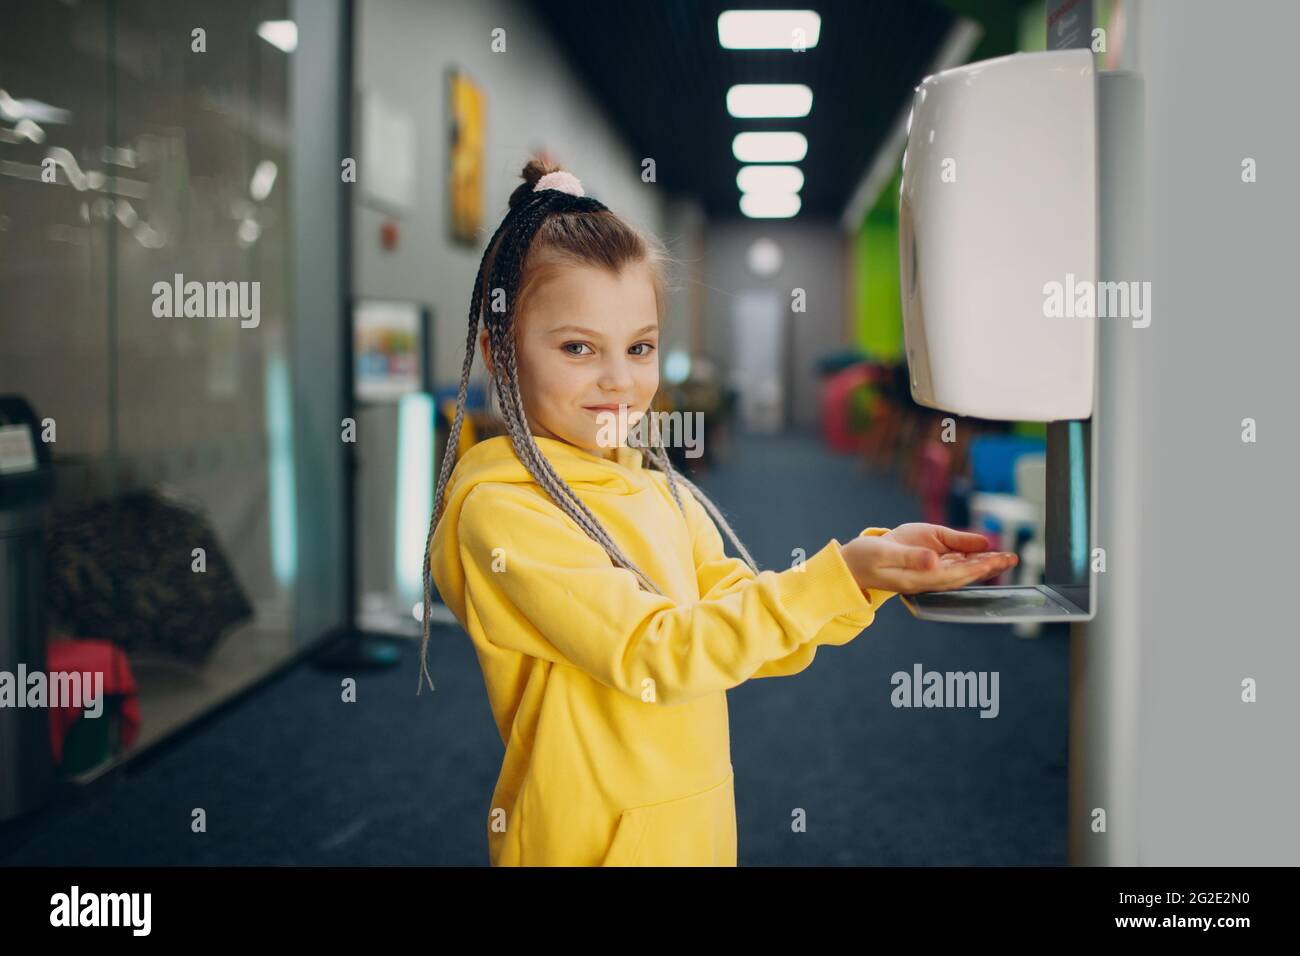 Little girl use automatic sanitizer with alcohol gel dispenser for hands in kindergarten. Antiseptic disinfectant indoor, new normal Coronavirus COVID-19 pandemia concept. Stock Photo